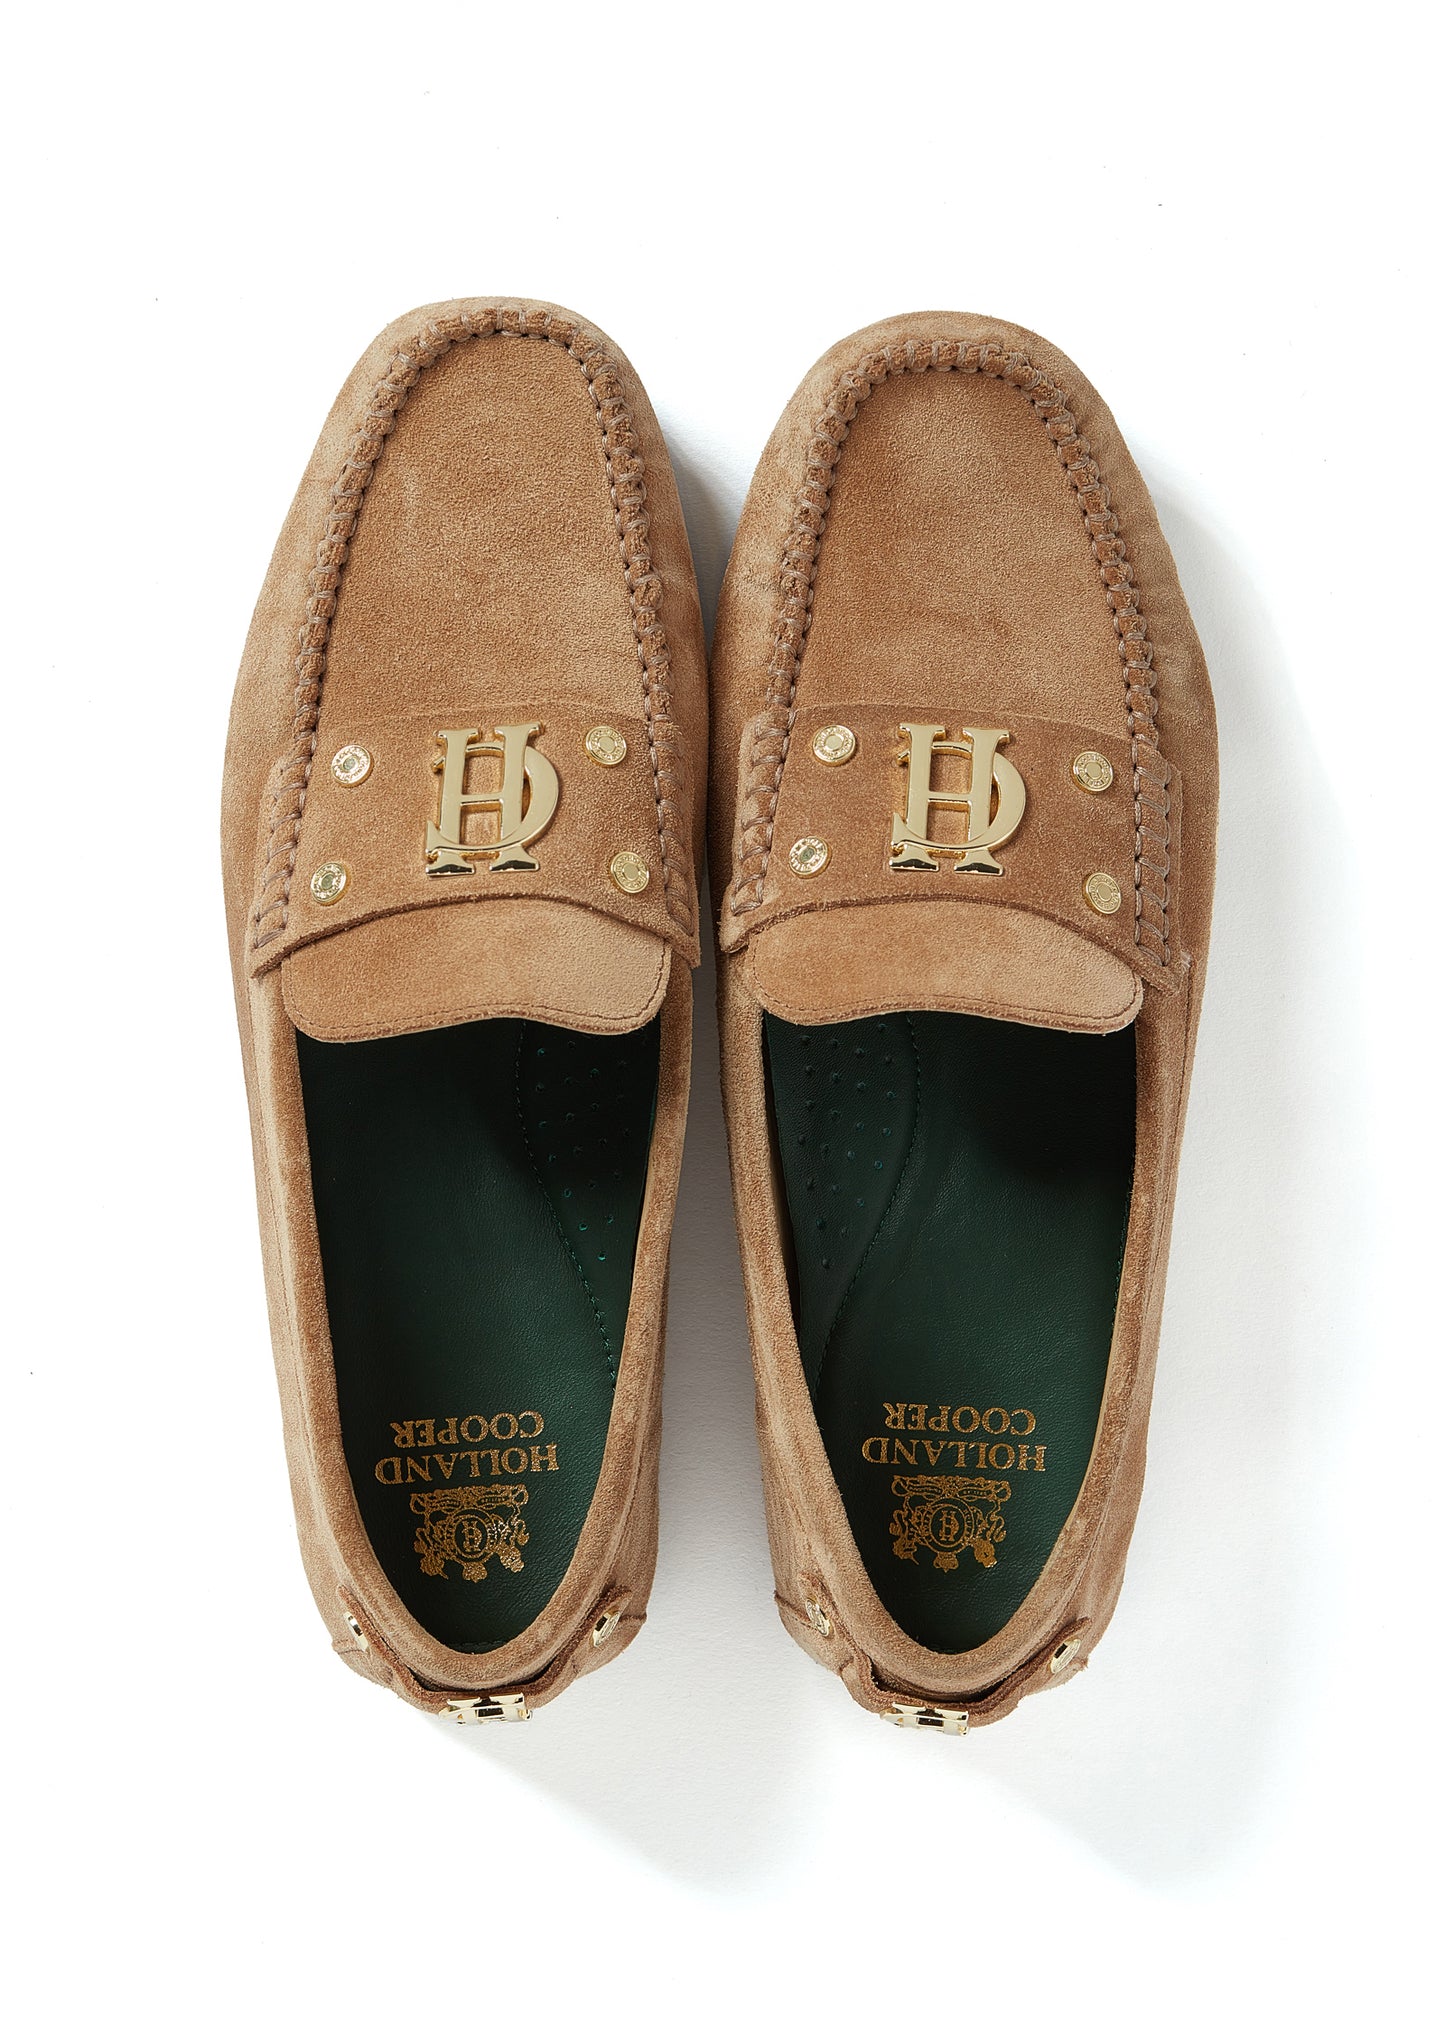 The Driving Loafer